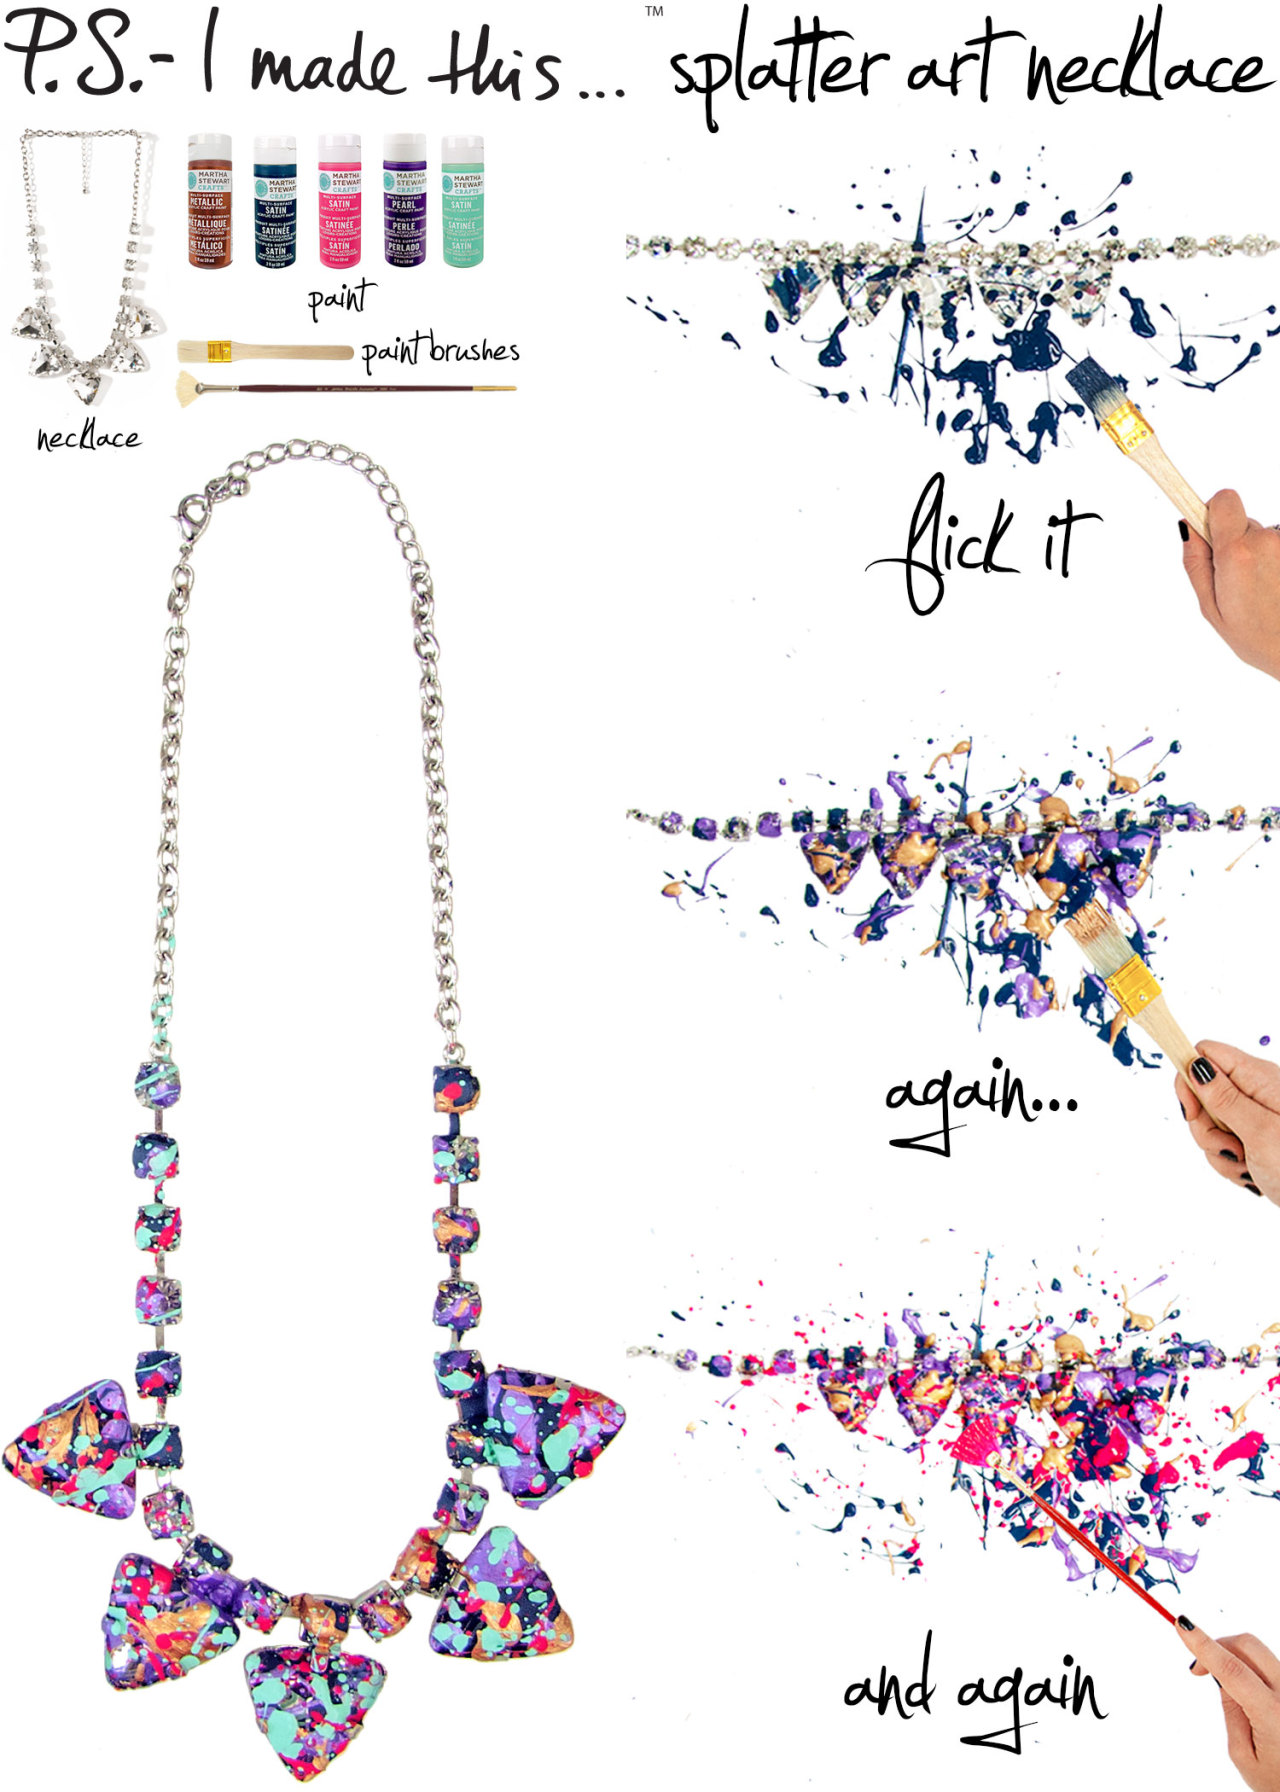 
Whether you&#8217;re a Jackson Pollock aficionado or couldn&#8217;t get enough of Spin Art as a kid, there&#8217;s no denying the positive impact of colorful and energetic splatters of paint. Add an unexpected addition to your outfit with jewelry inspired by designer Tom Binns&#8217; splatter-effect Spring 2013 collection. This artistic wow-factor will makes you want to celebrate and paint the town. So bring out your inner DIY expressionist and turn an old accessory into a fresh work of art!

To create: Select an assortment of paint colors. The more colors, the more layers you&#8217;ll have. To keep a tidy space, use newspaper or a drop cloth. Pour a dollop of paint onto a protective surface and dab a paint brush; flick onto a statement necklace, we opted for a chunky rhinestone version. Take your next color and repeat. Try different brushes for an array of speckled effects. Once finished, let completely dry before wearing.